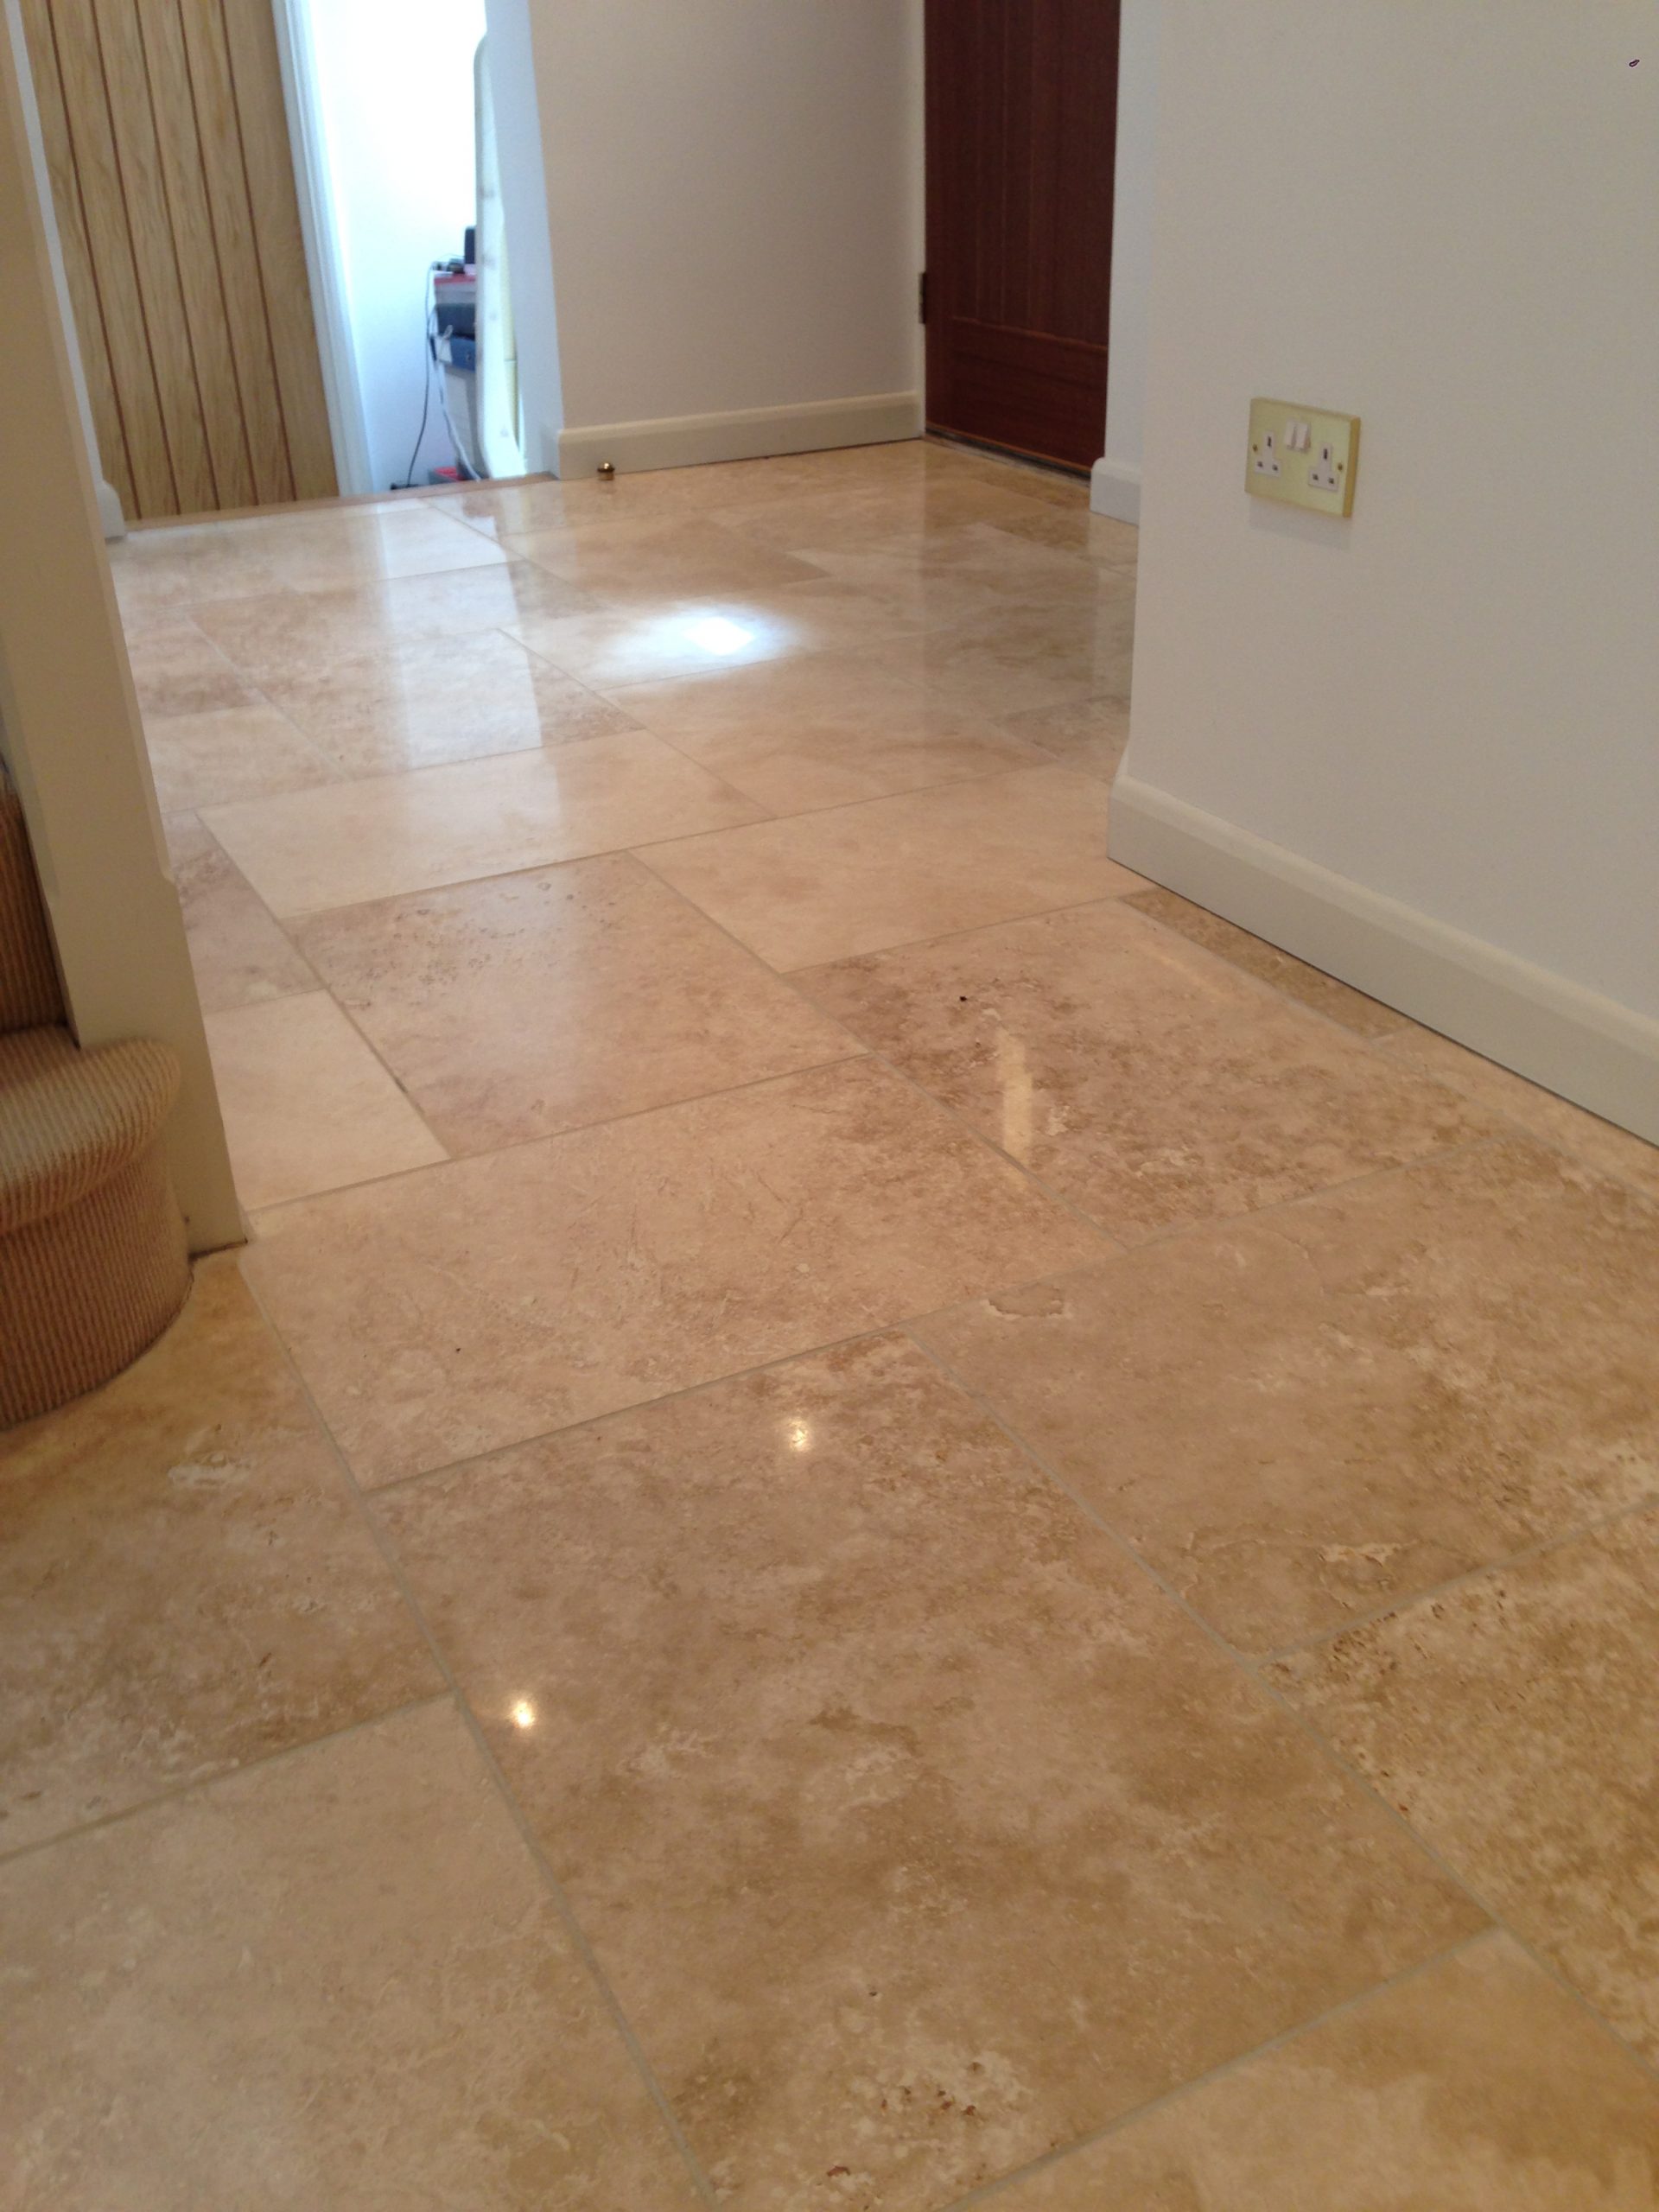 Travertine kitchen floor tiles after cleaning polishing2